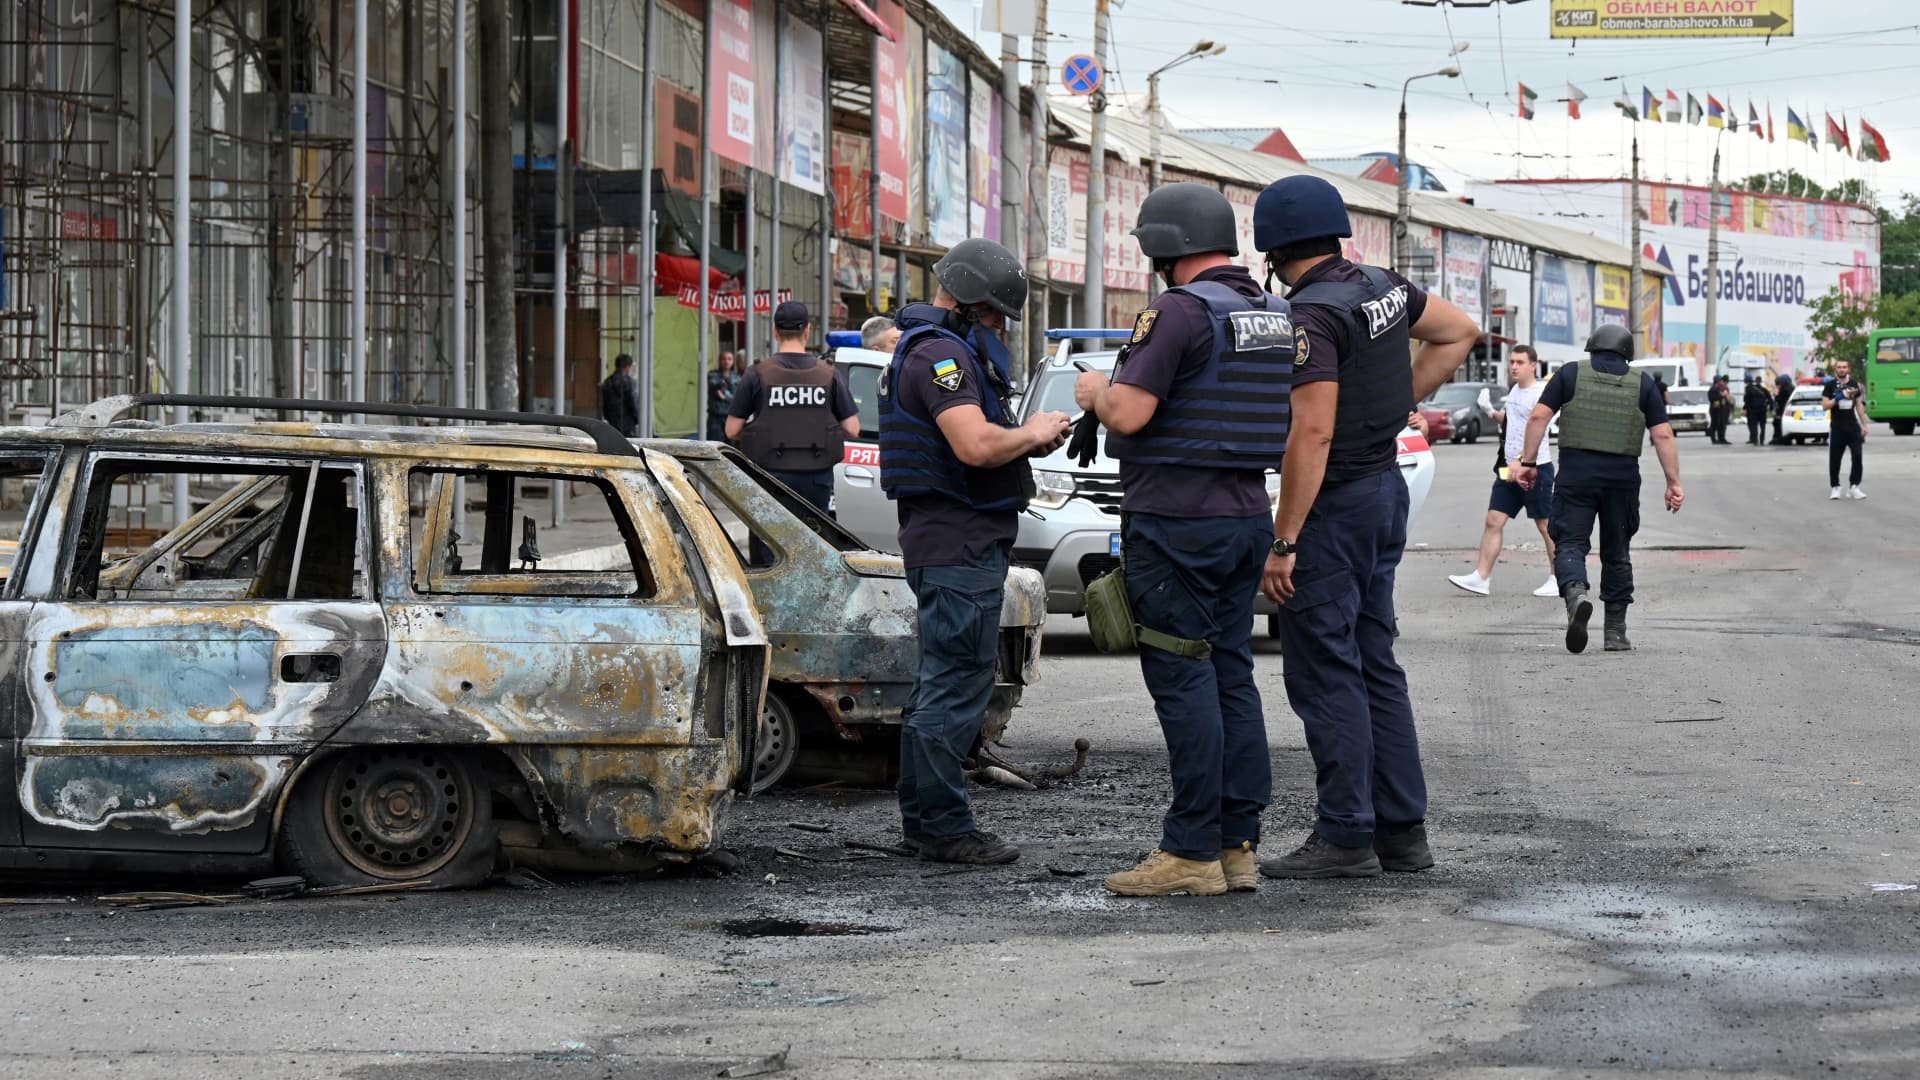 Rescuers stand next to burnt cars after a Russian rocket strike in one of the districts of the second largest Ukrainian city of Kharkiv on July 21, 2022 amid the Russian invasion of Ukraine.